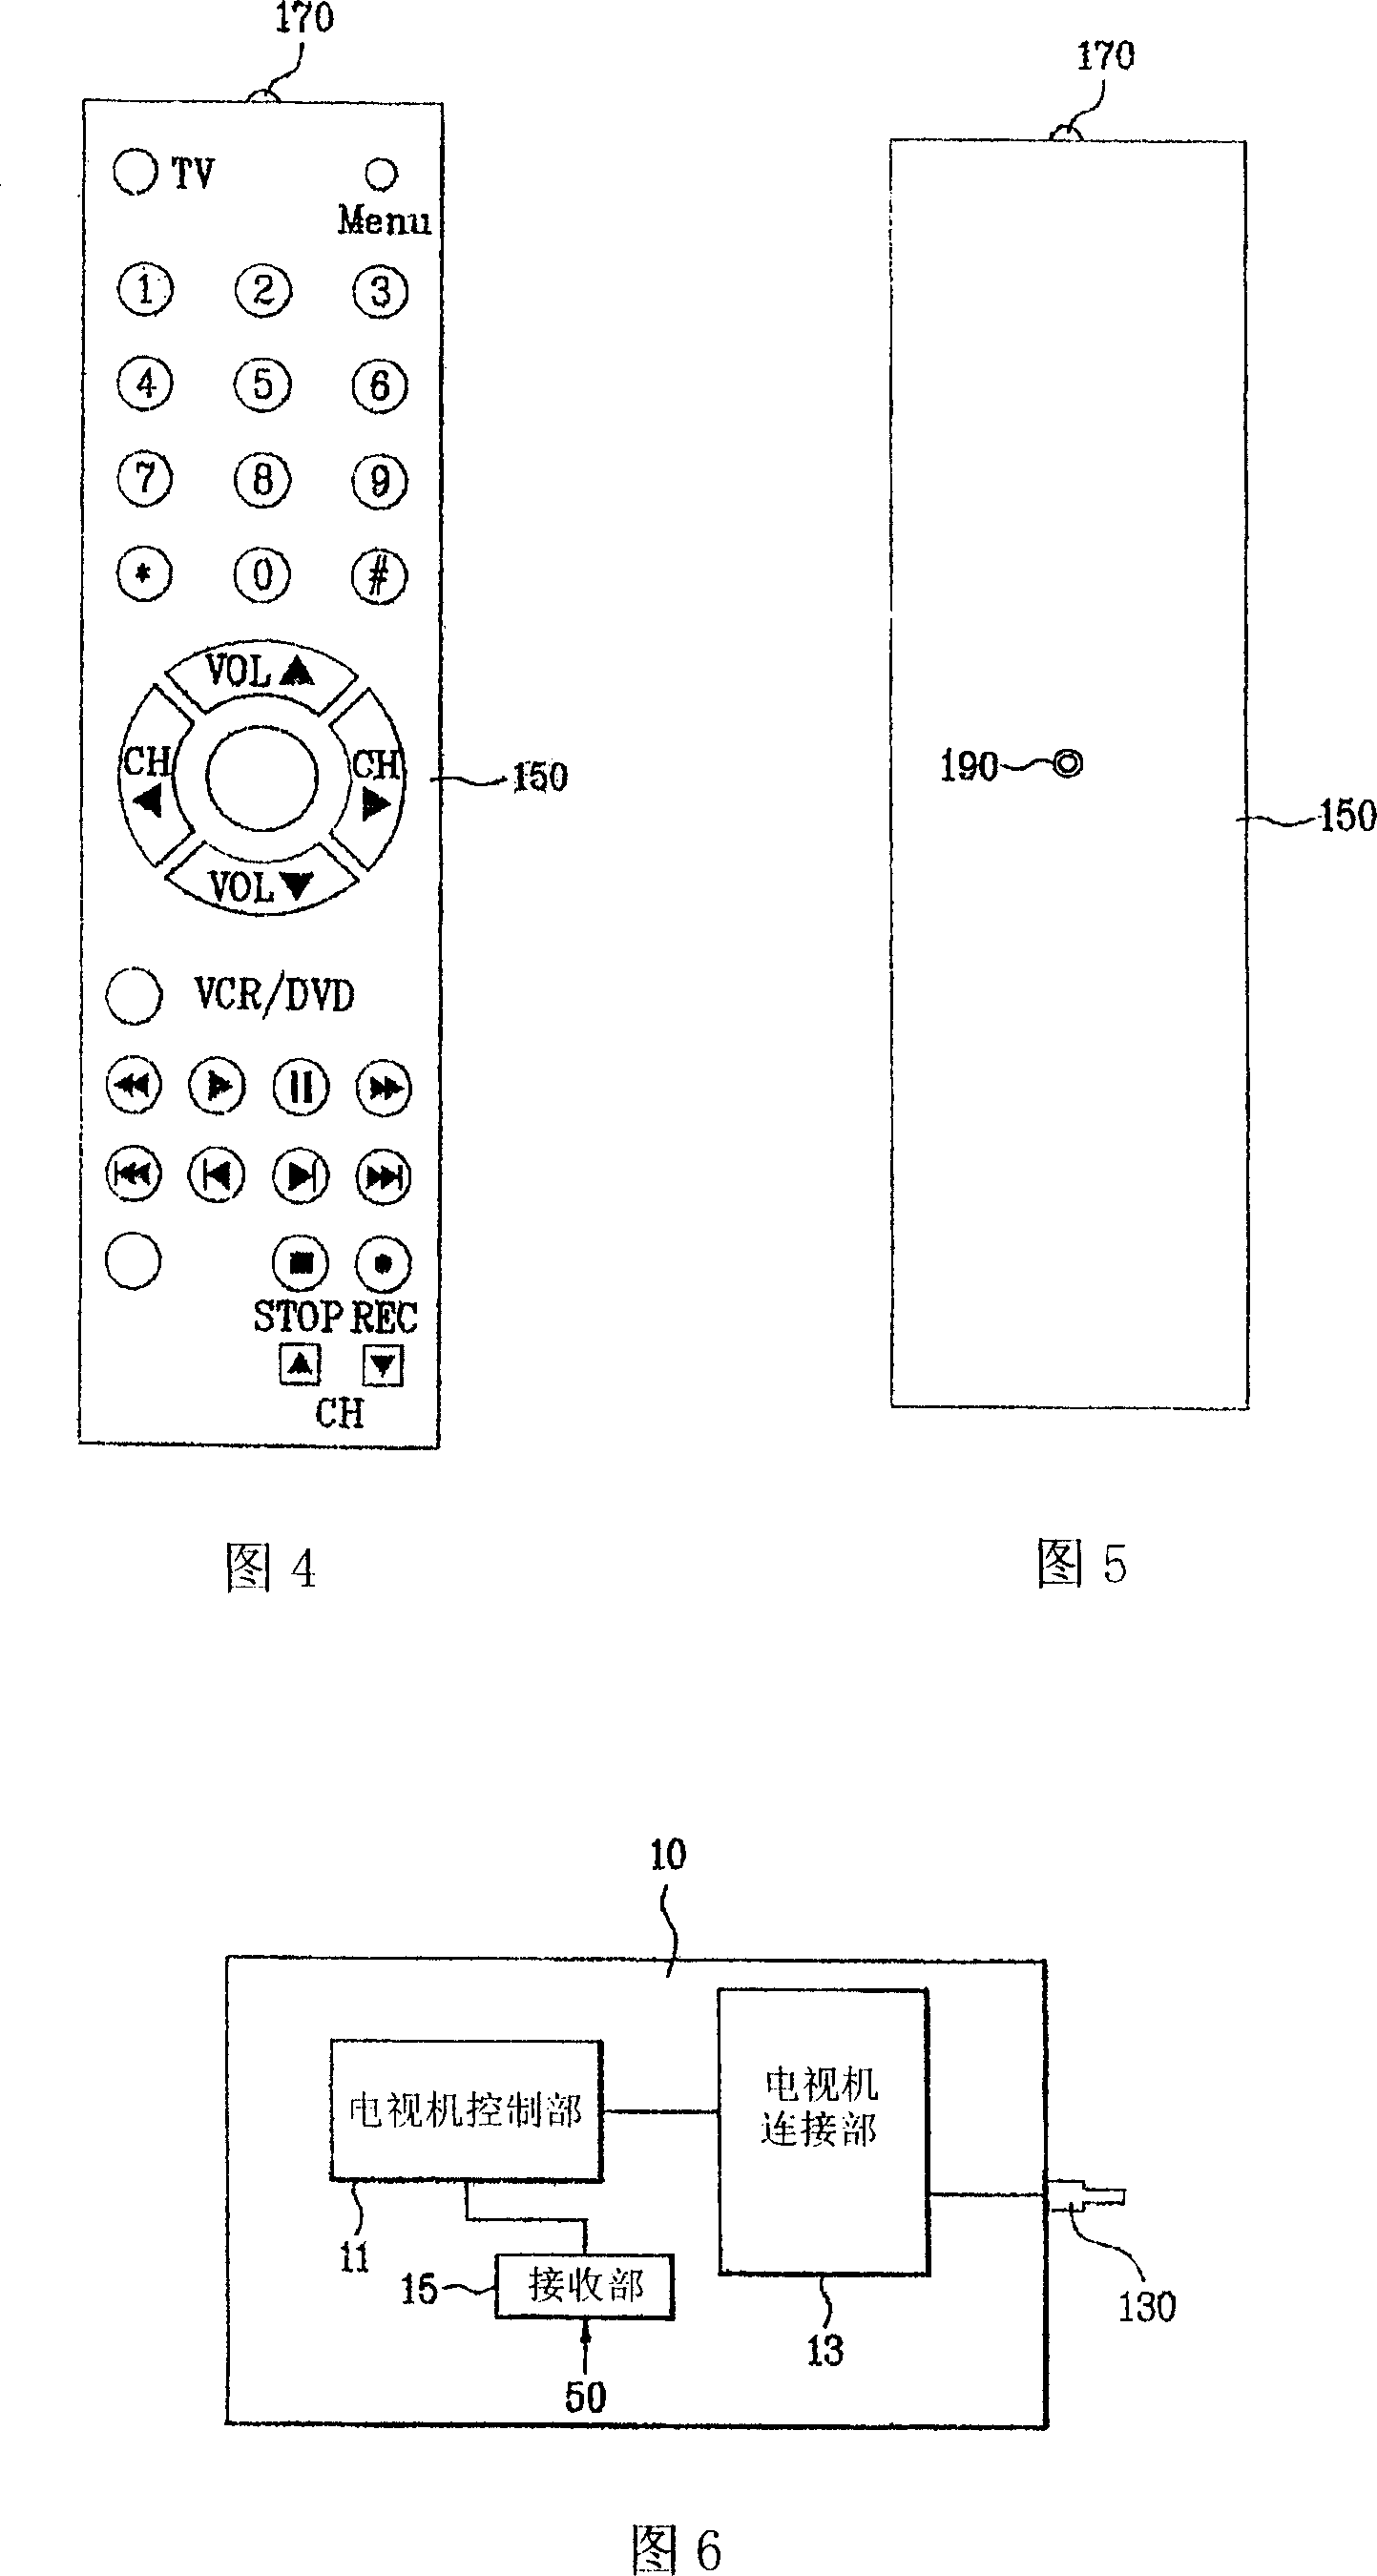 Remote controller with local key for electronic apparatus